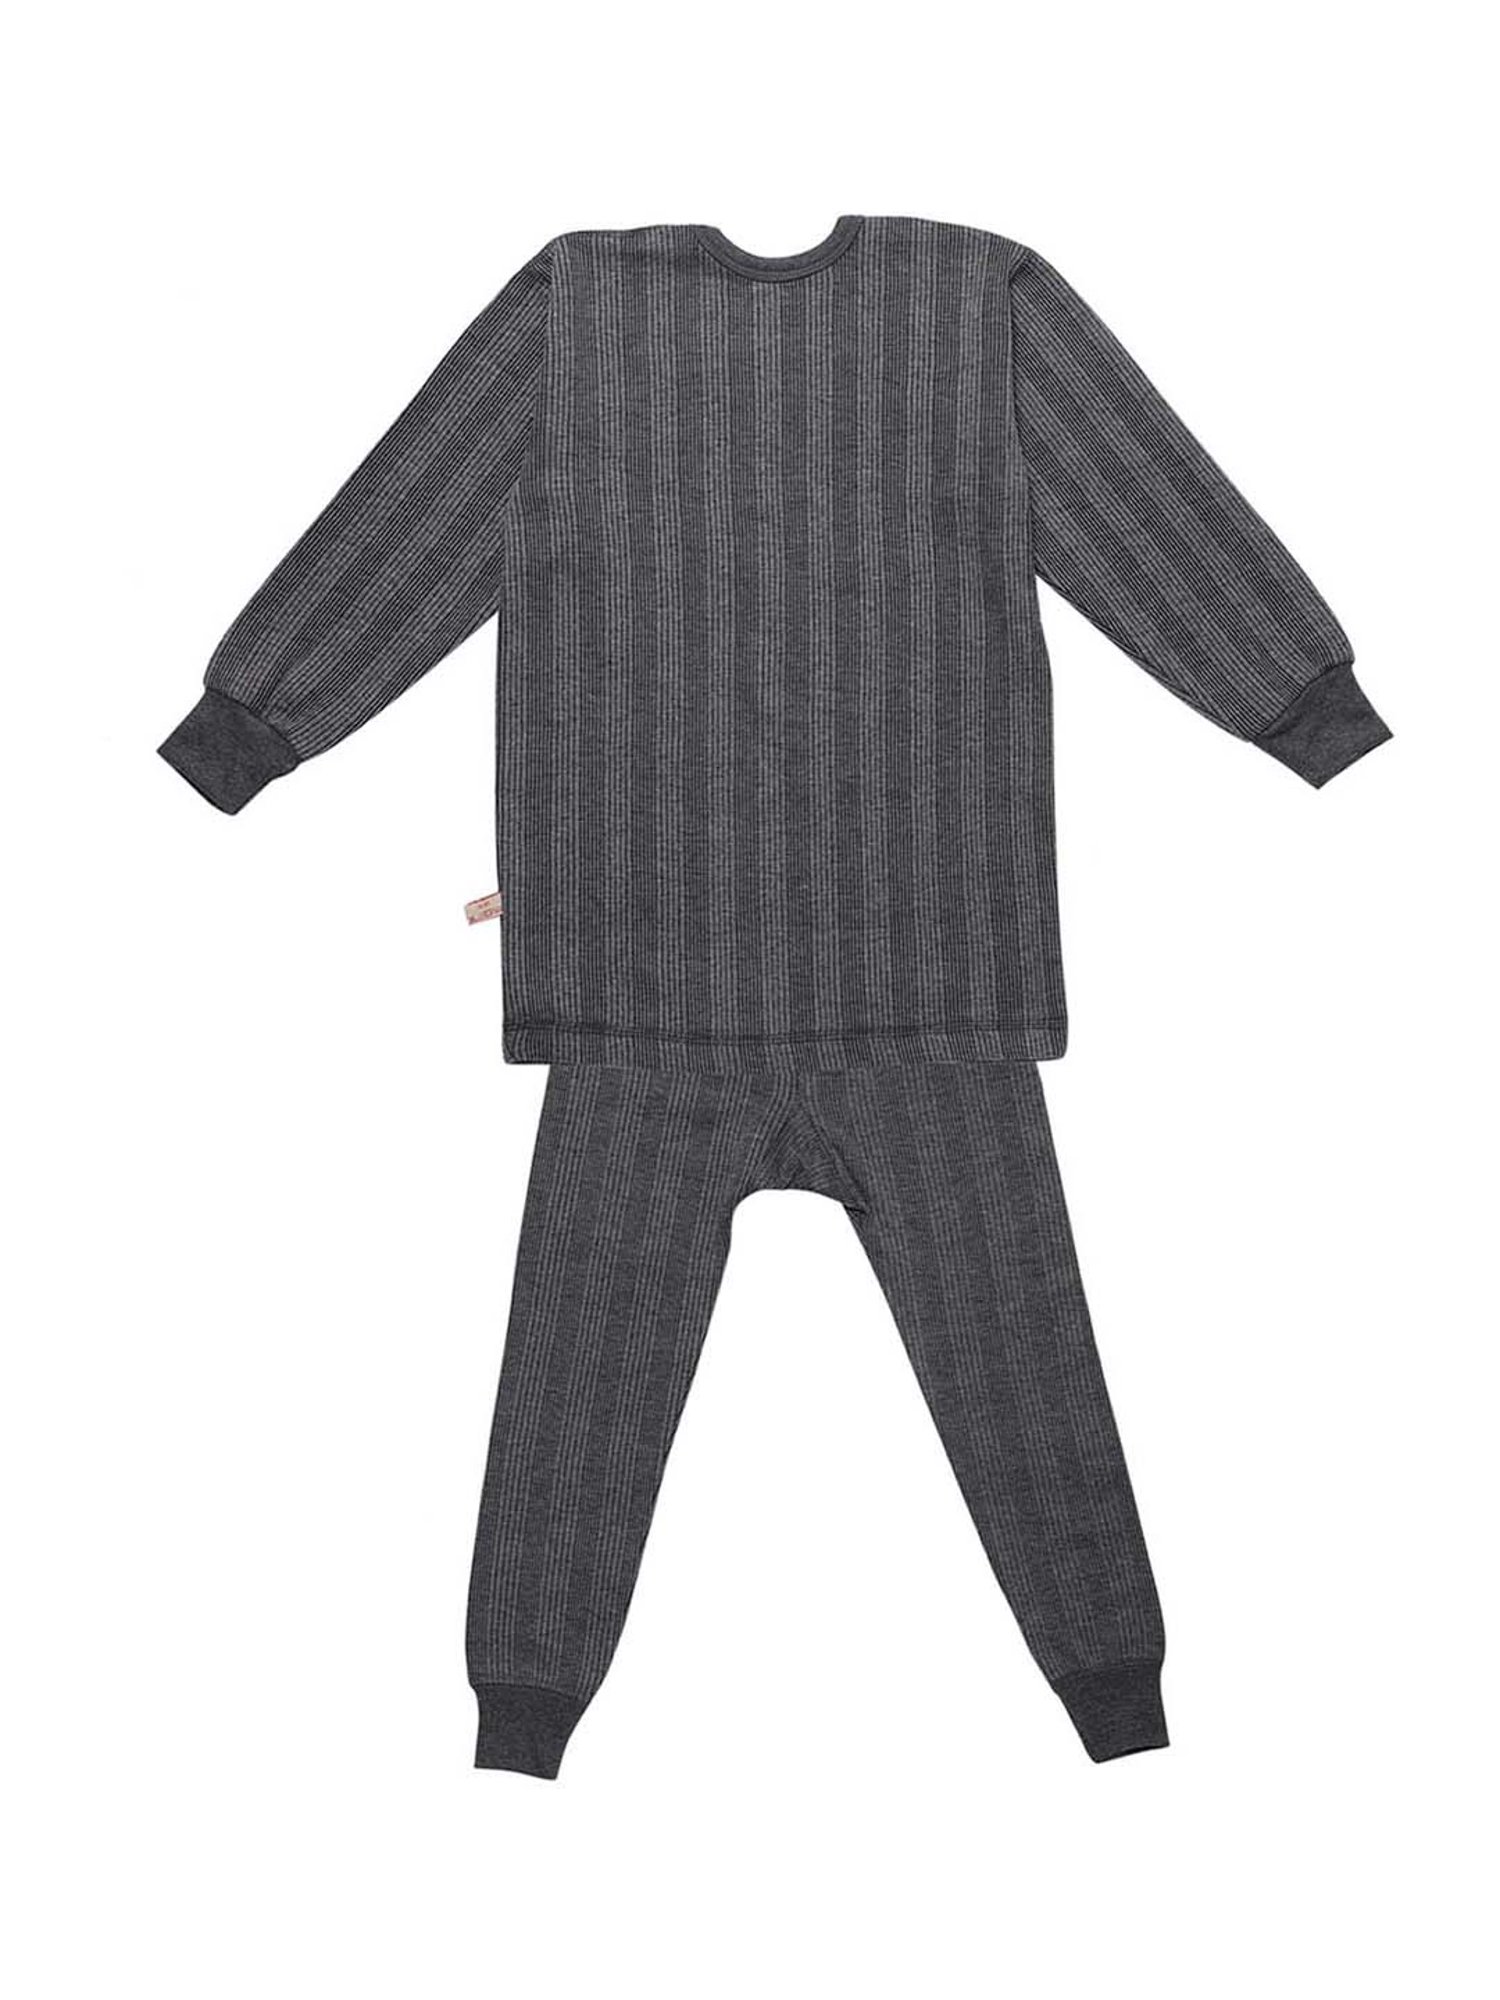 LUX Inferno Kids Charcoal Grey Skinny Fit Full Sleeves Thermal Set (Pack of  2)